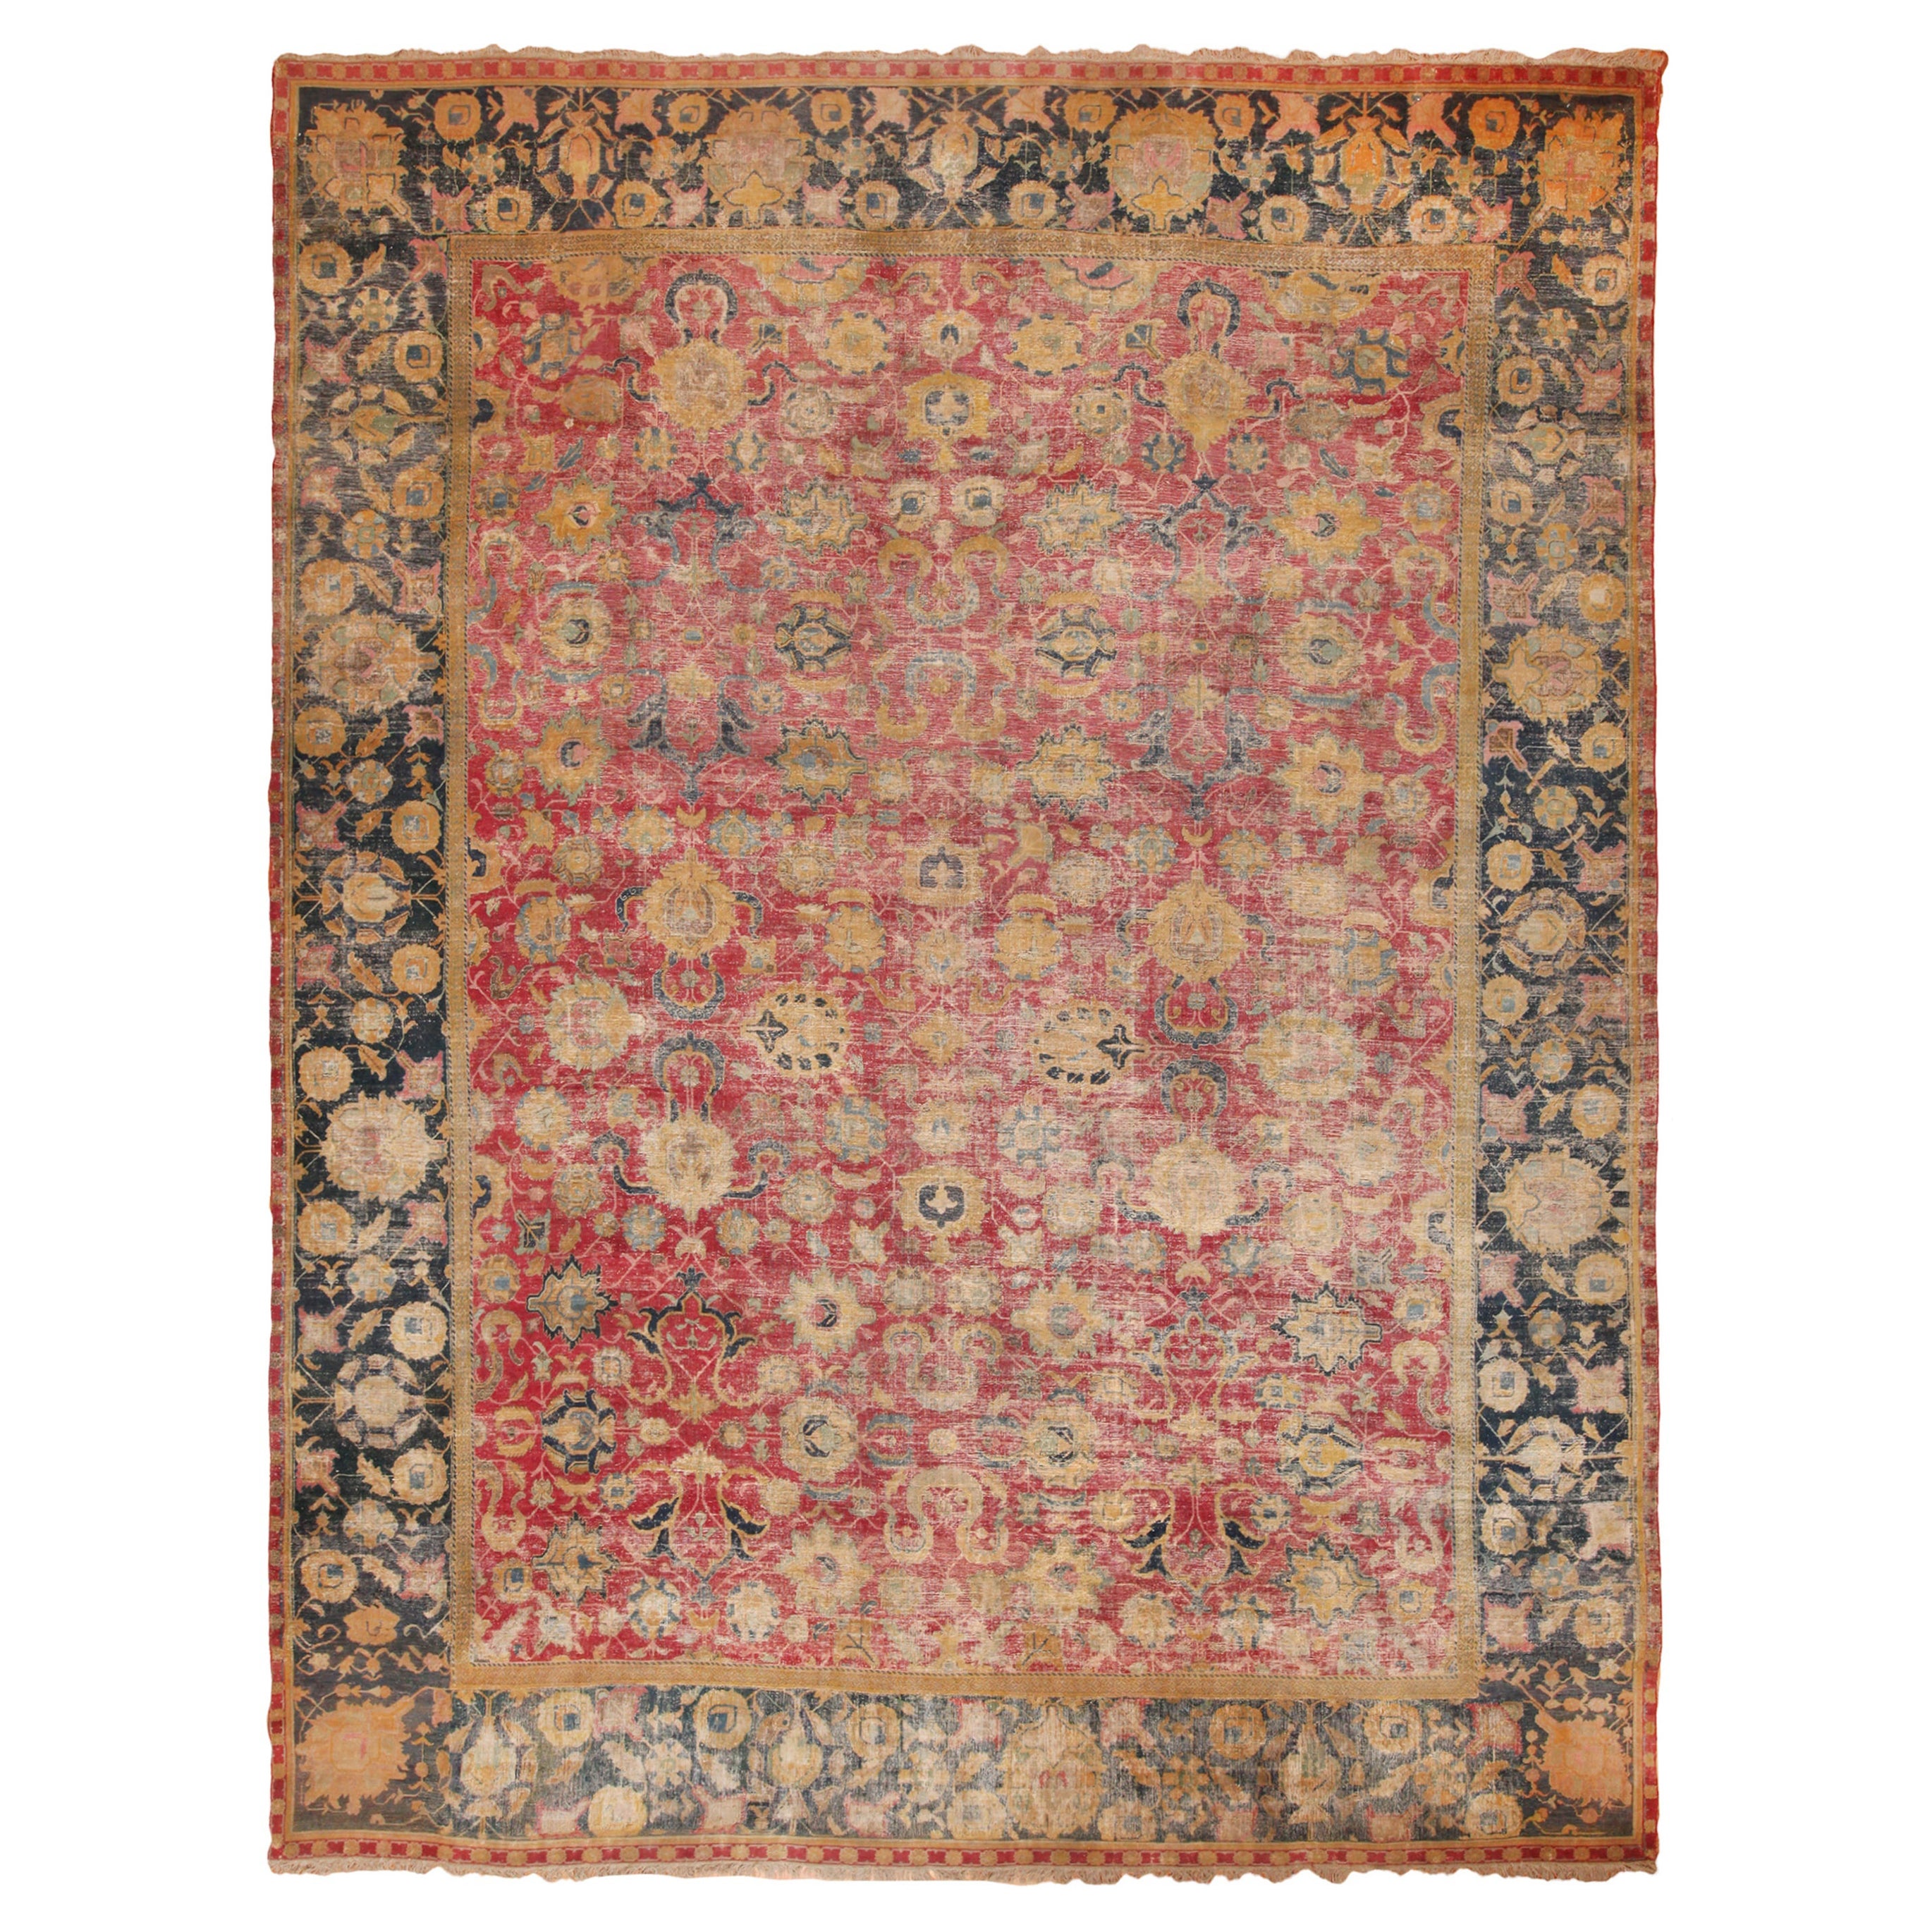 A Breathtaking Rare 17th Century Large Antique Persian Isfahan Rug 12'3" x 16' For Sale